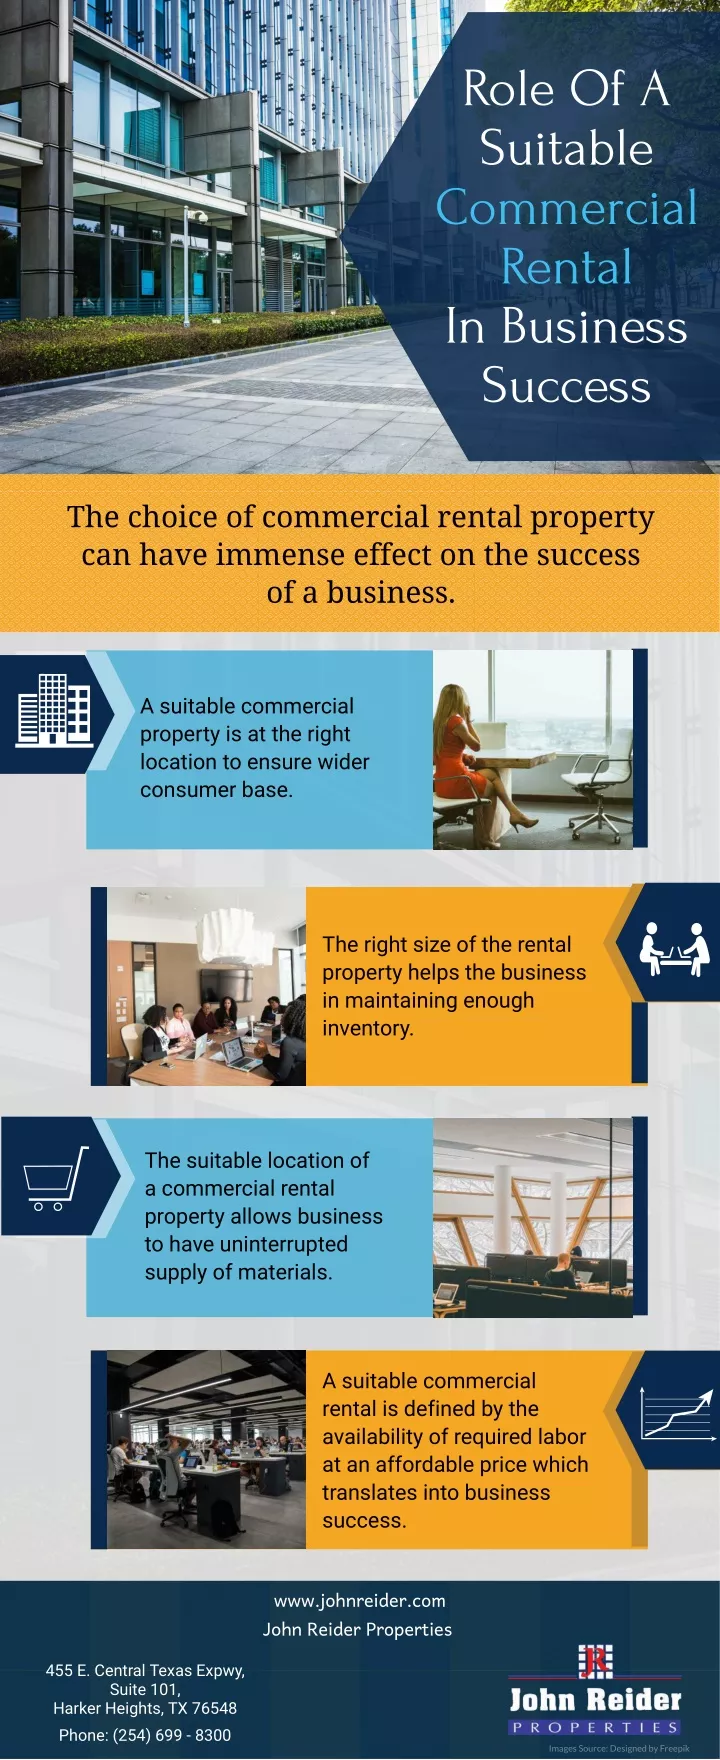 role of a suitable commercial rental in business